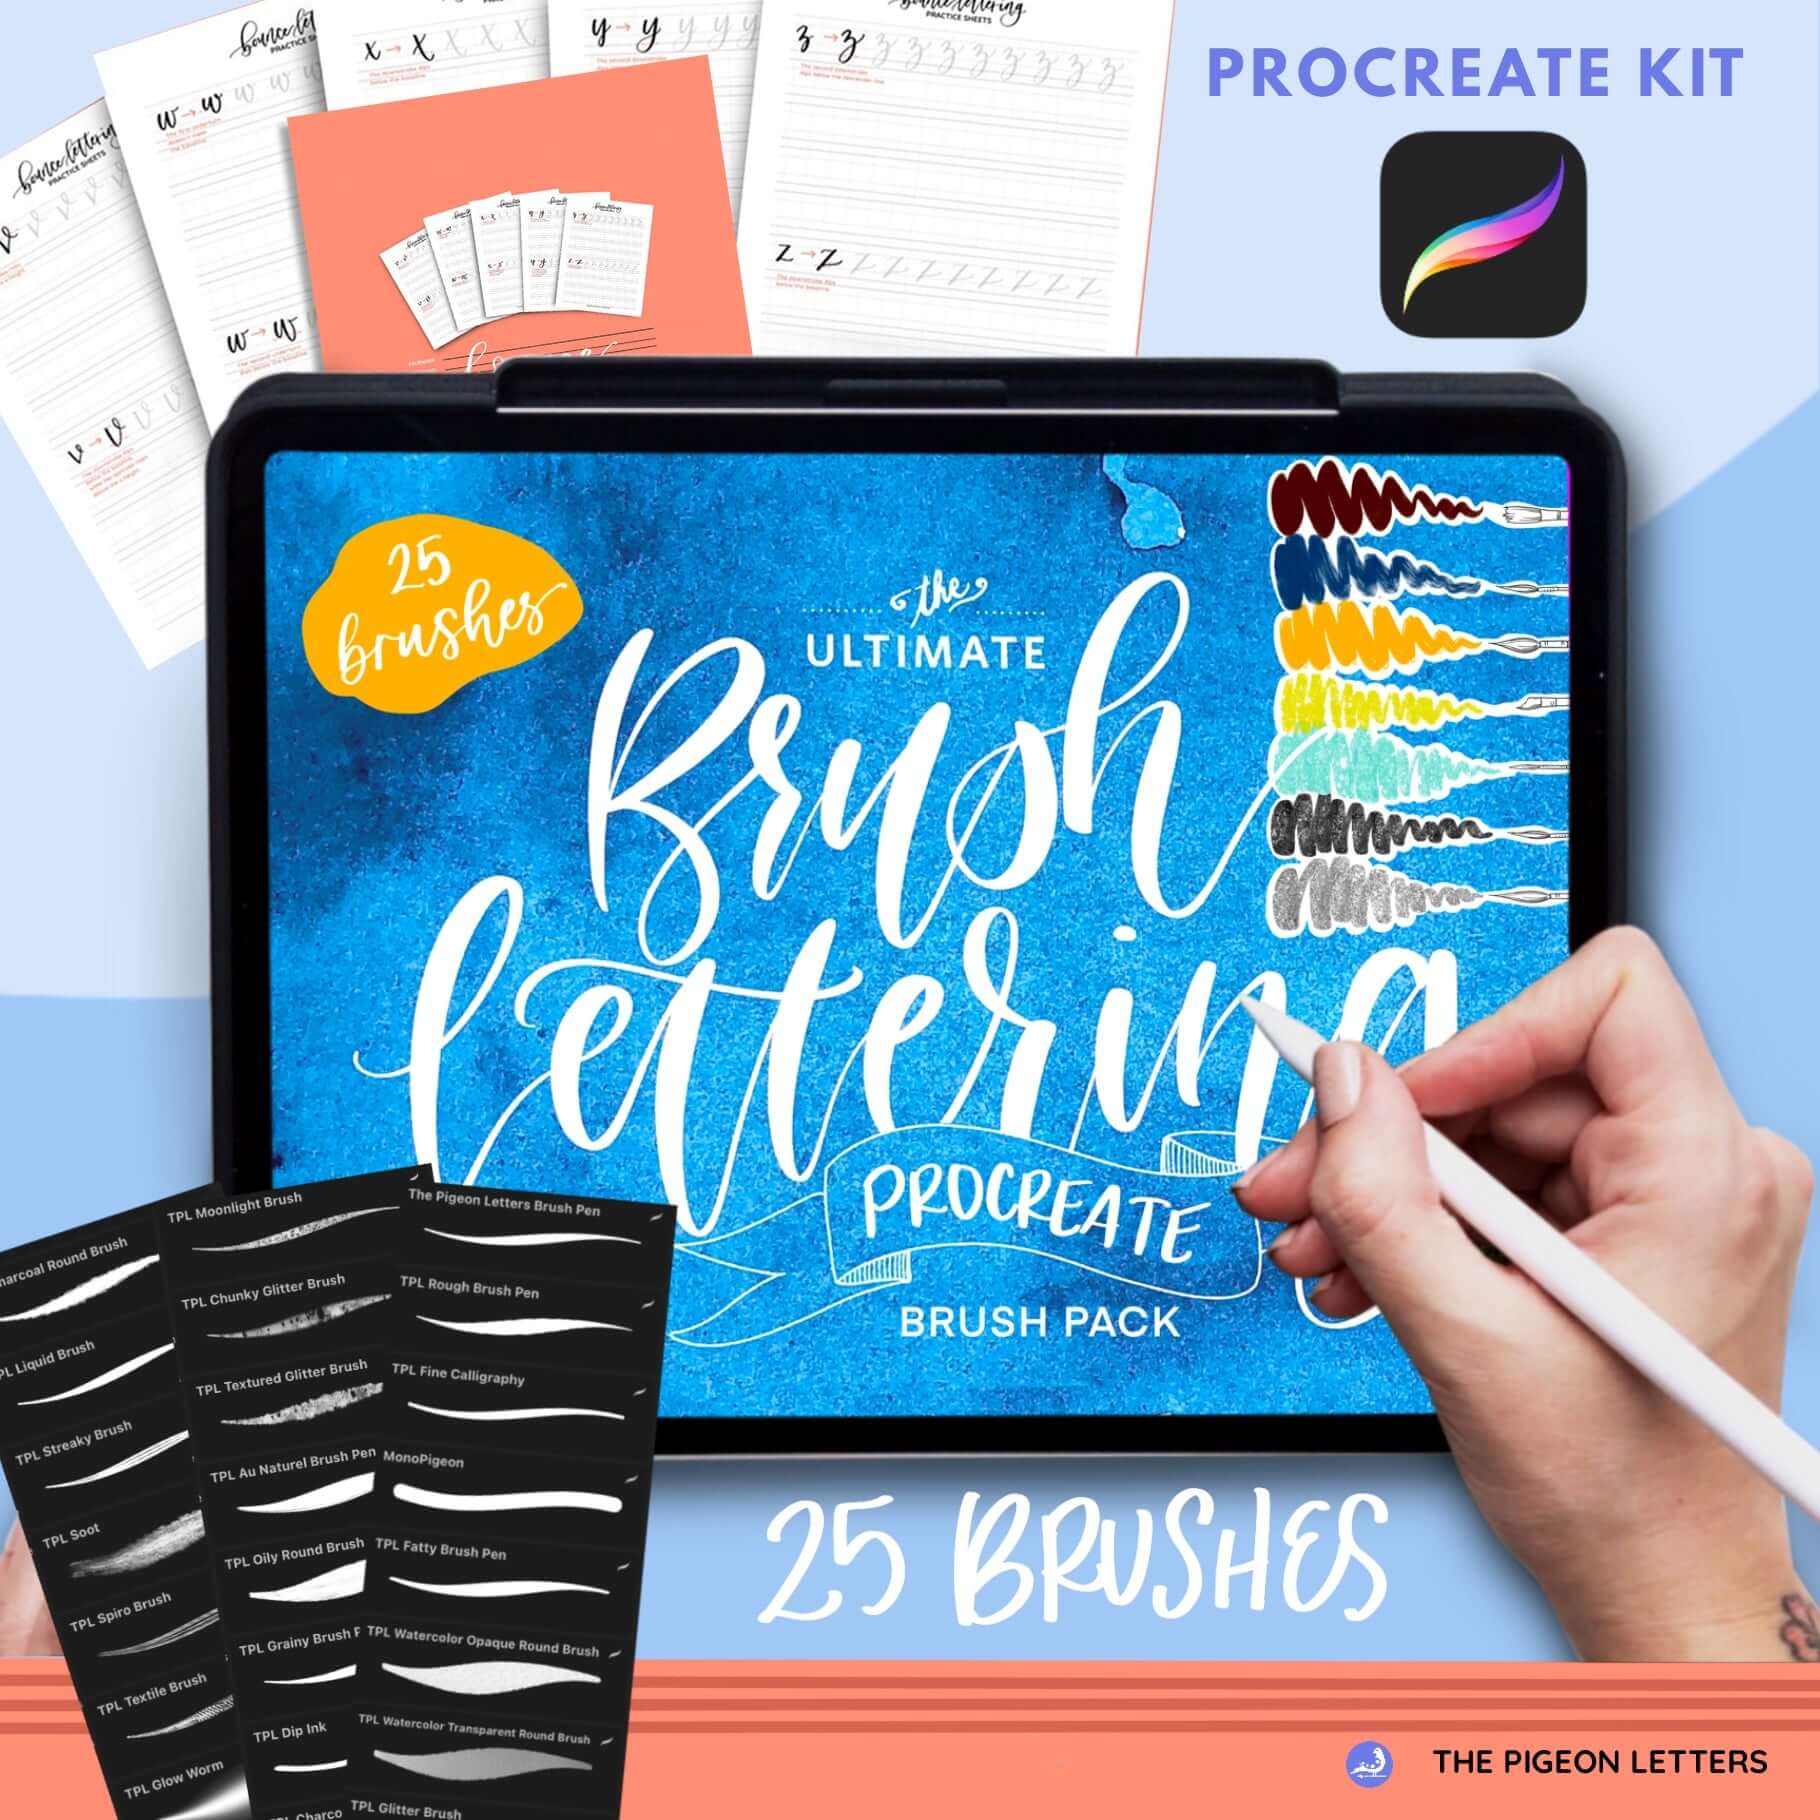 100+ Resources for Hand Letterers & Calligraphers - Paperlike